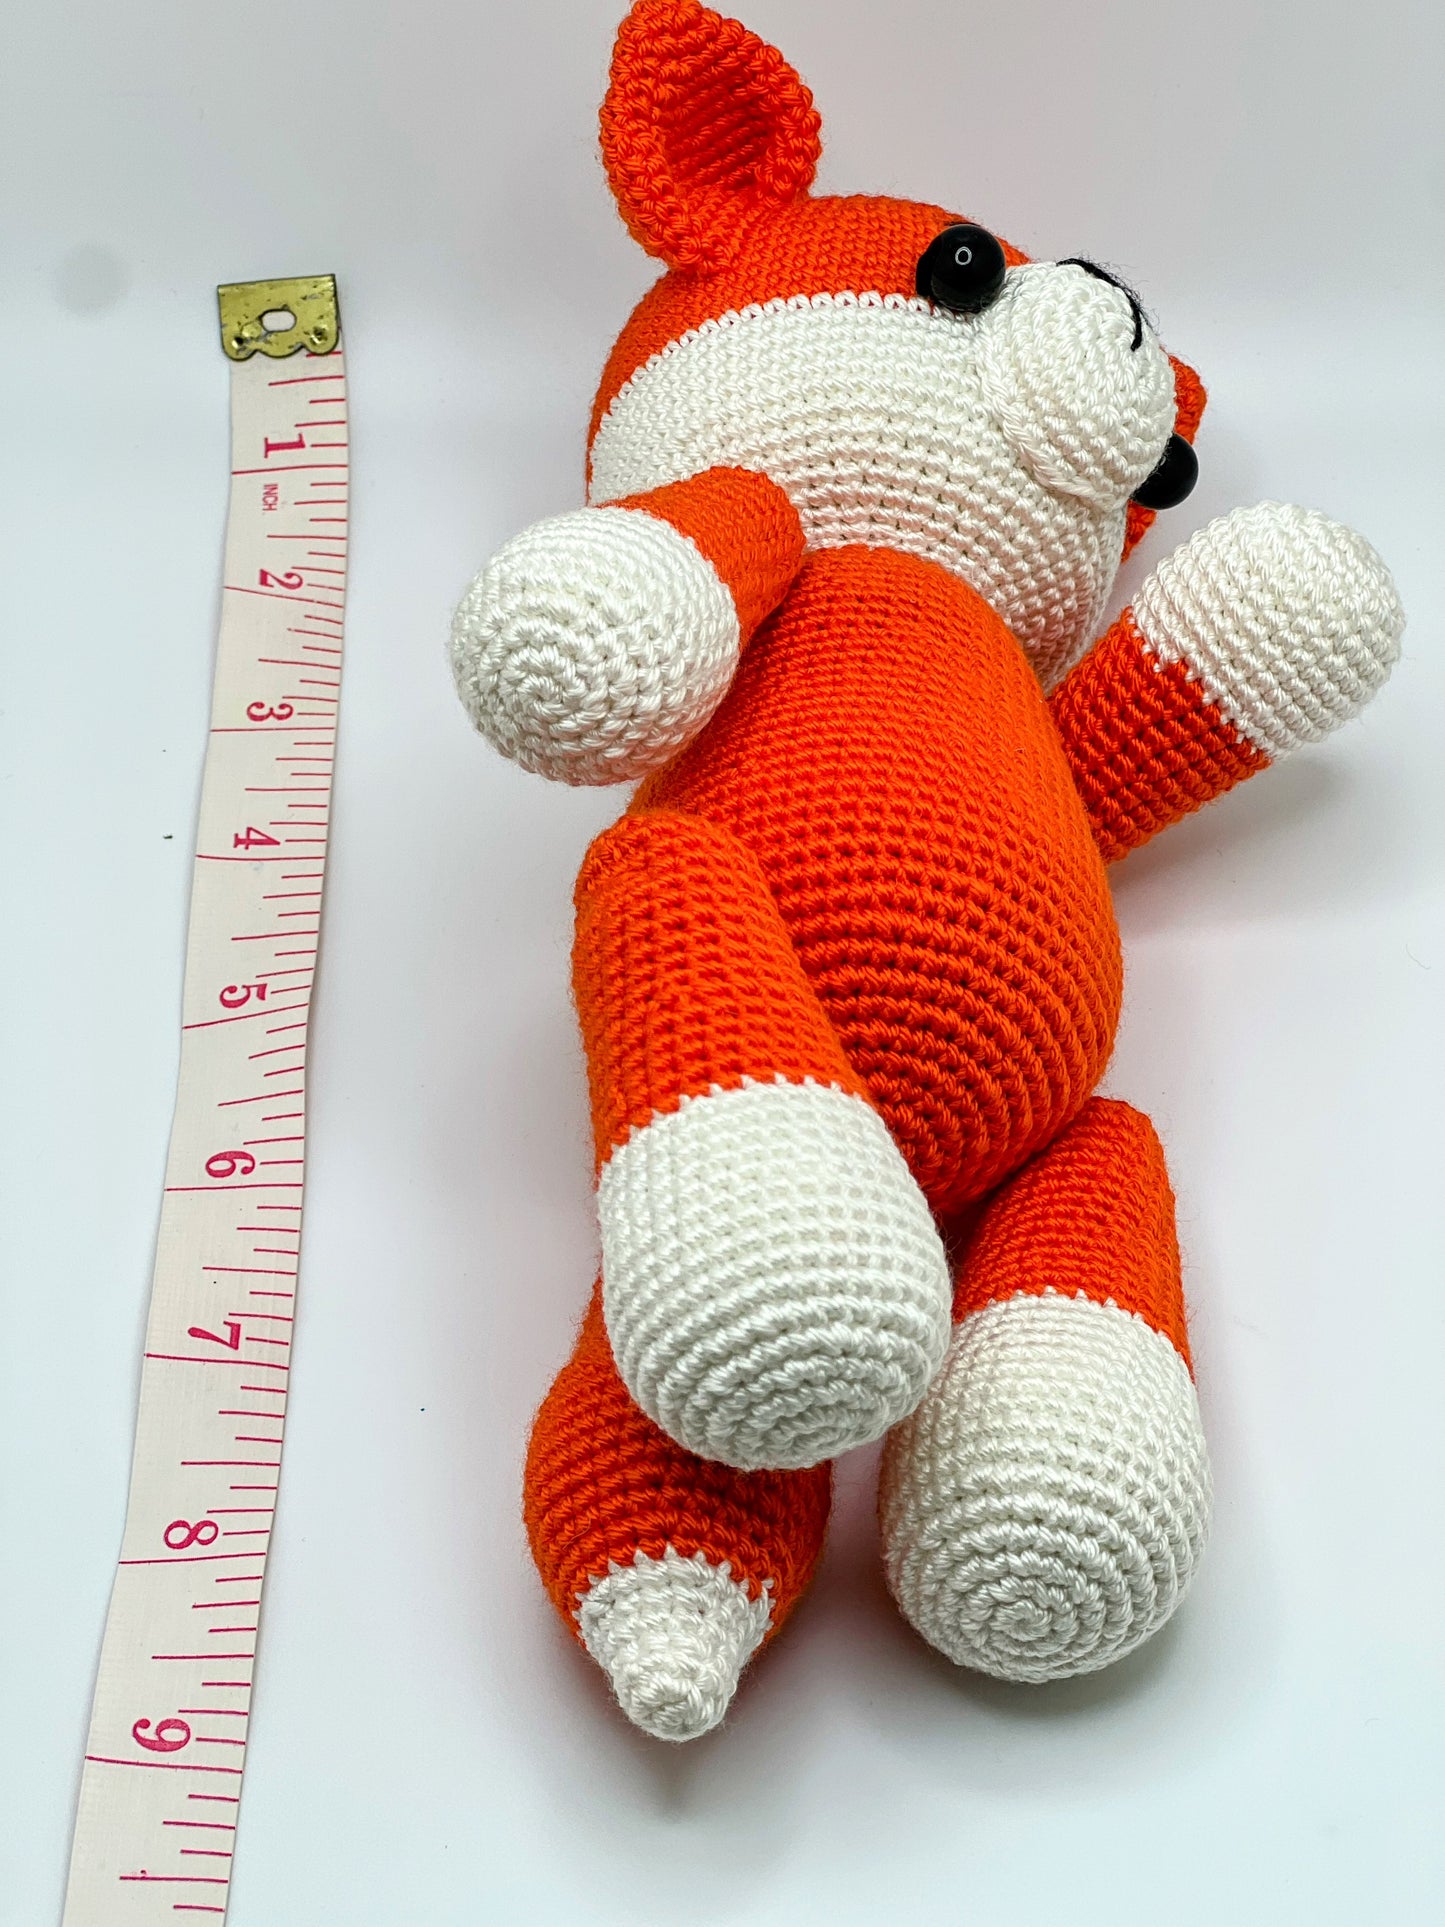 Stuffed Fox Toy With Moving Legs - Crochet Knitted Amigurumi Toy